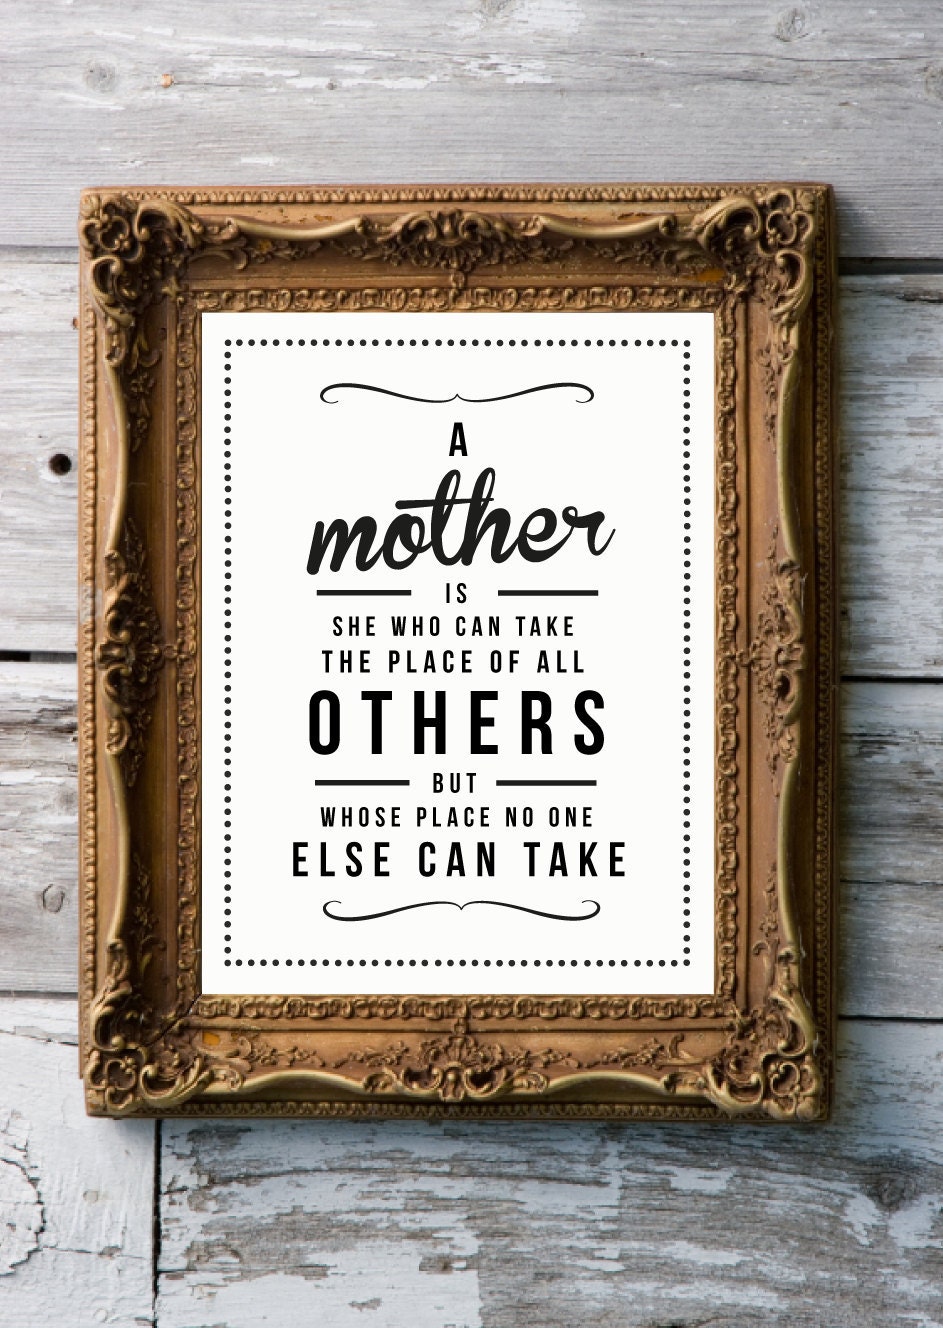 Retro Inspirational Quote Giclee Art Print - Vintage Typography Decor - Customize - Mother's Day UK